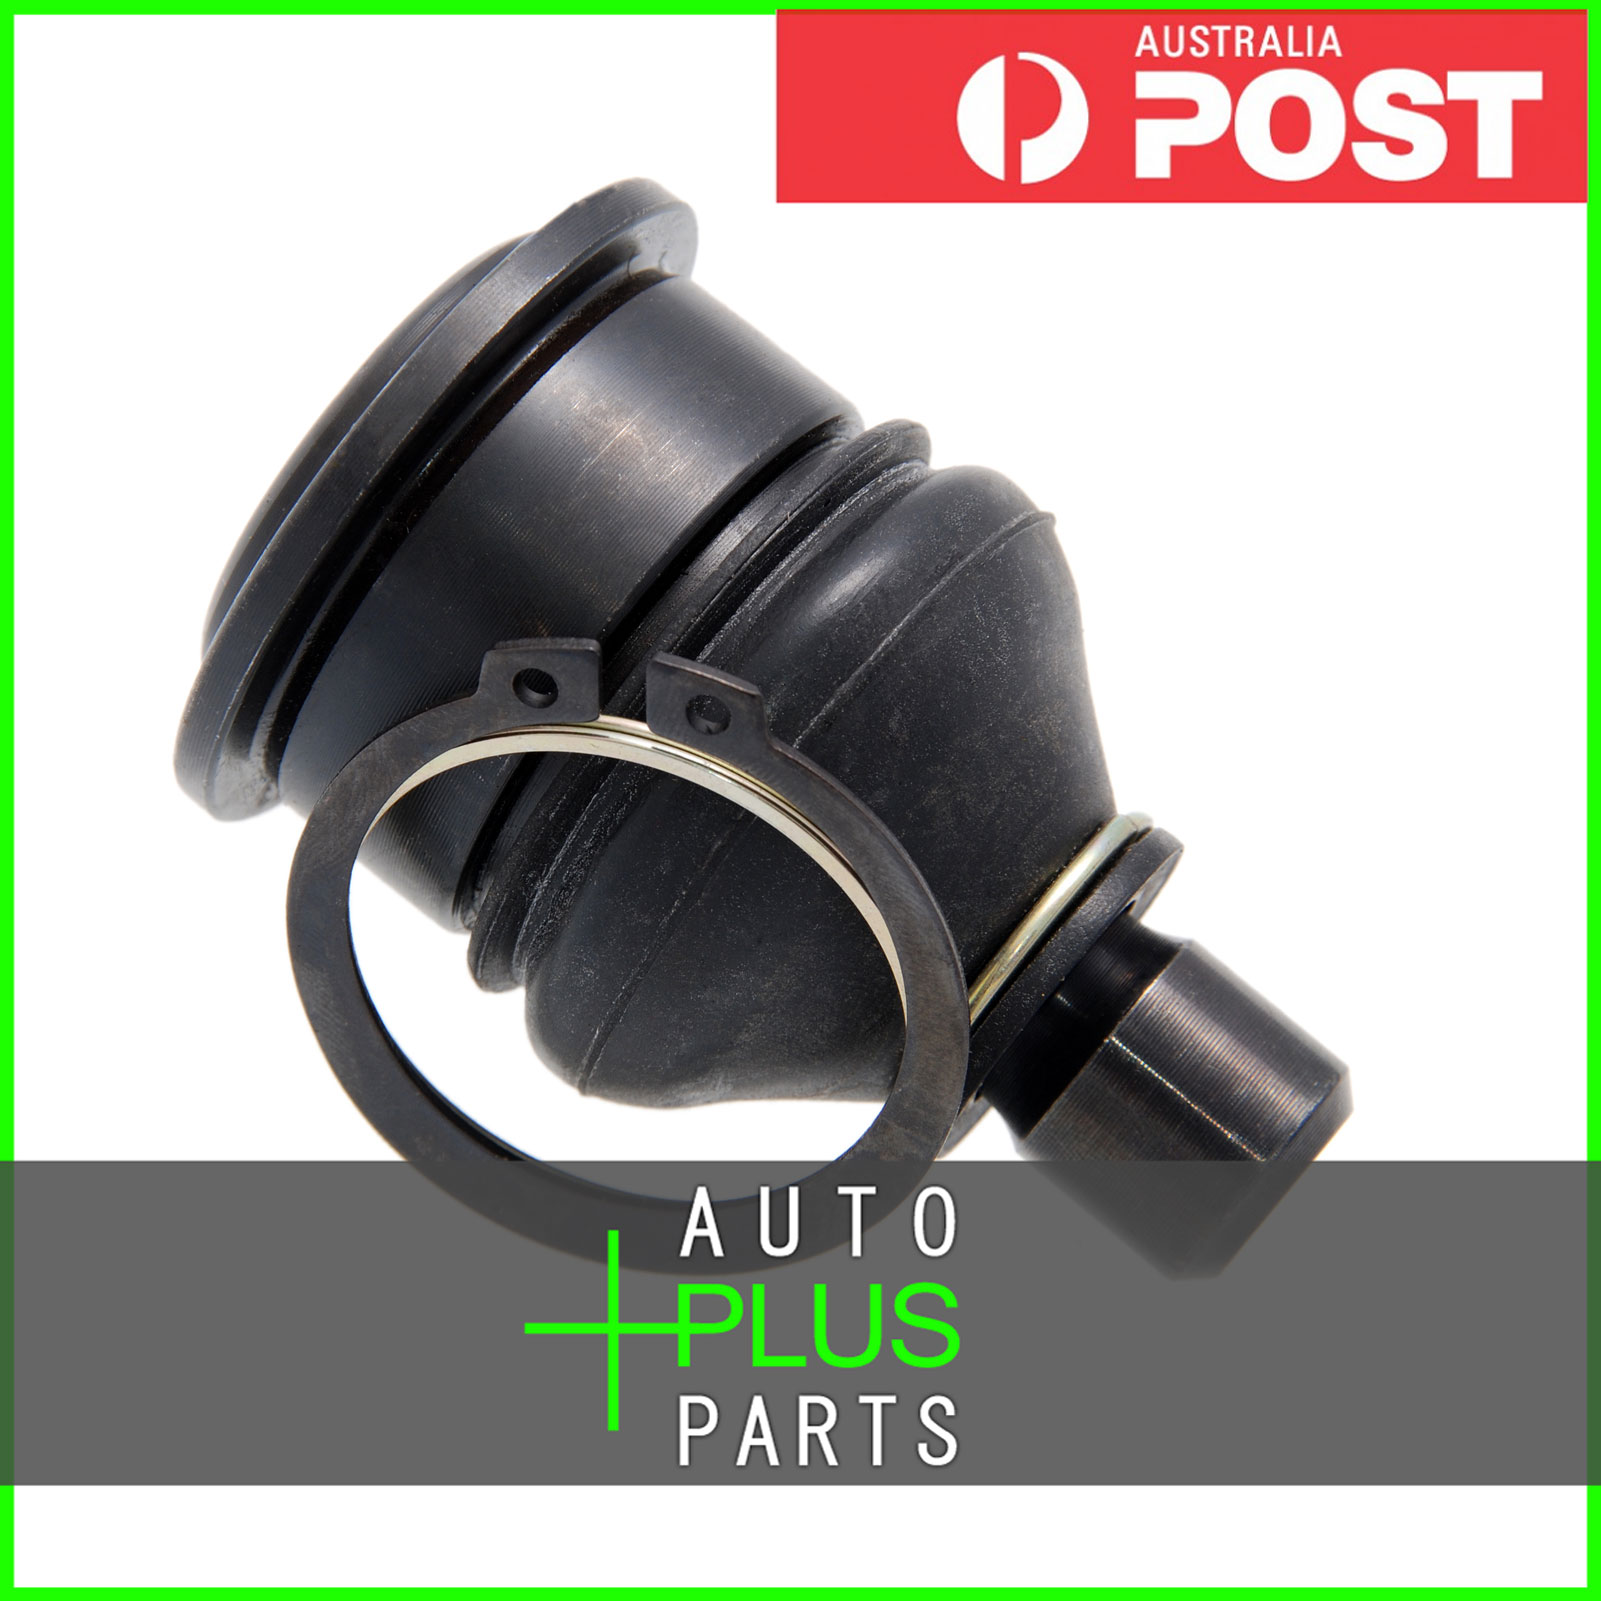 Fits FORD ESCAPE - BALL JOINT FRONT LOWER ARM | eBay